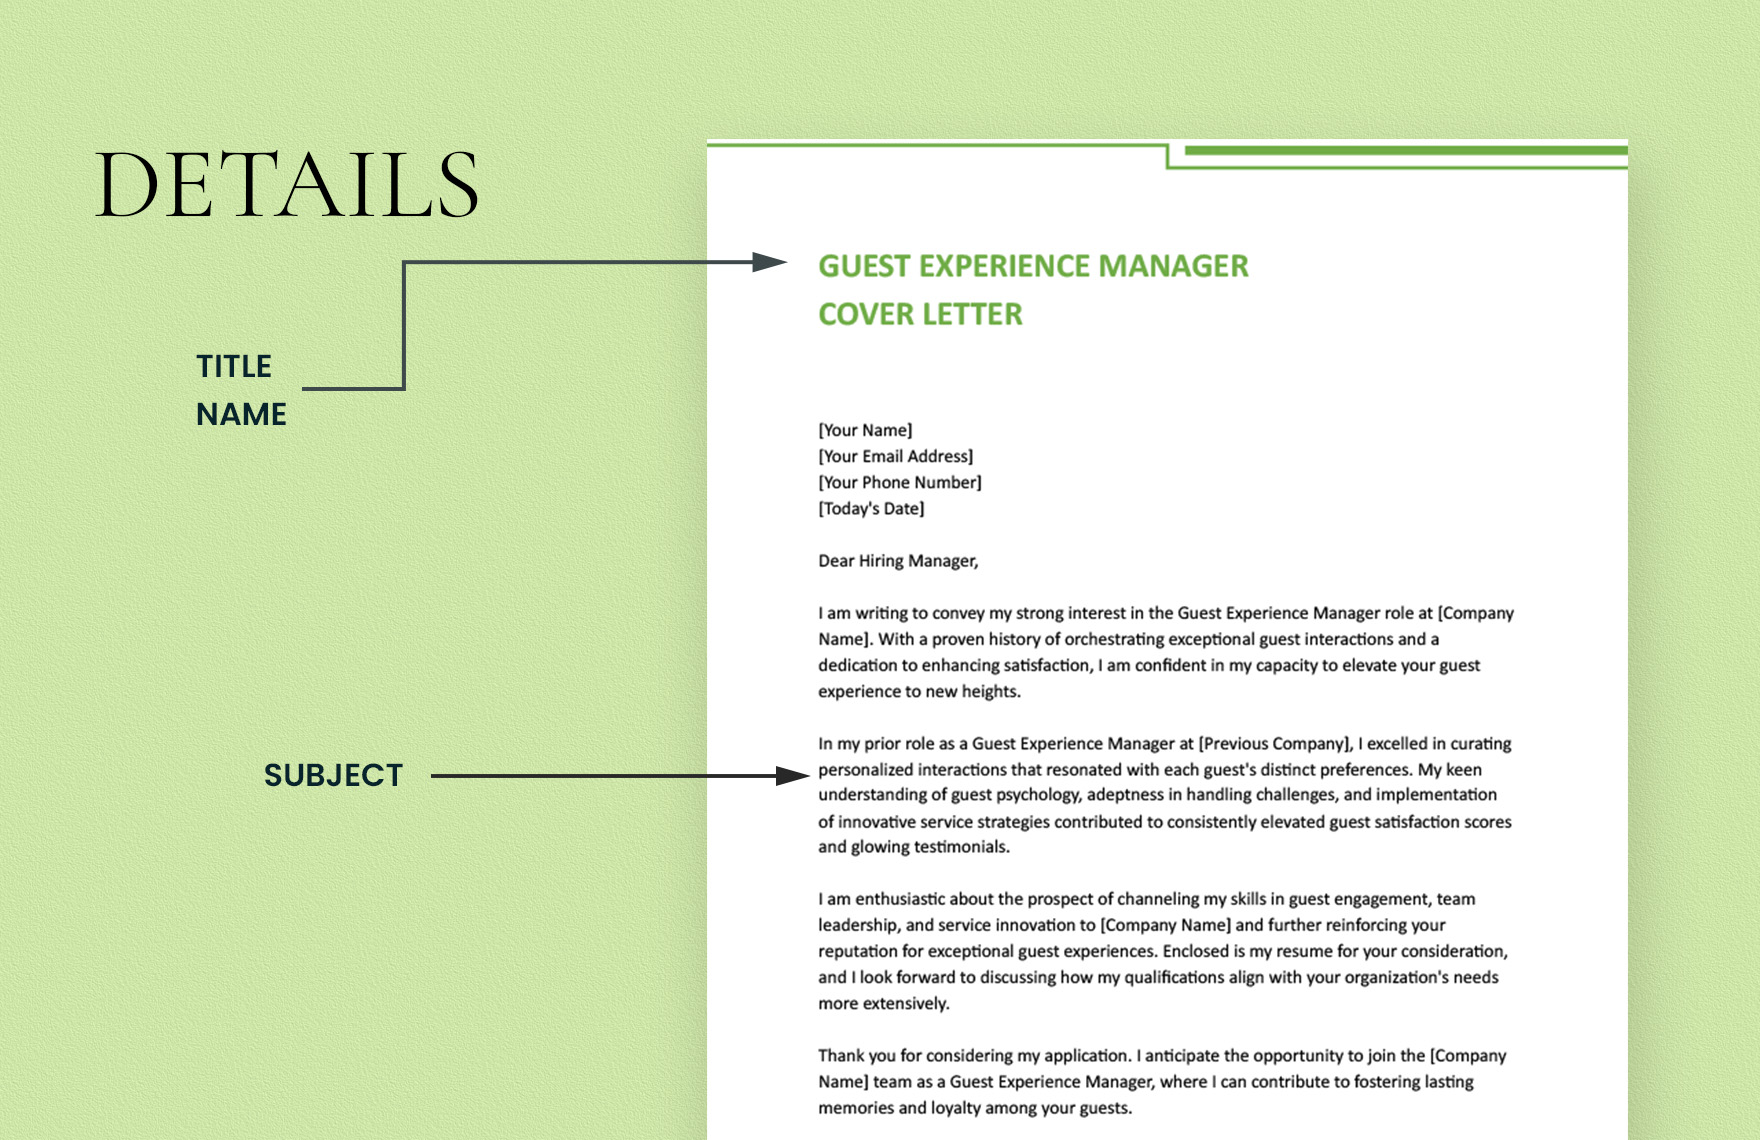 Guest Experience Manager Cover Letter